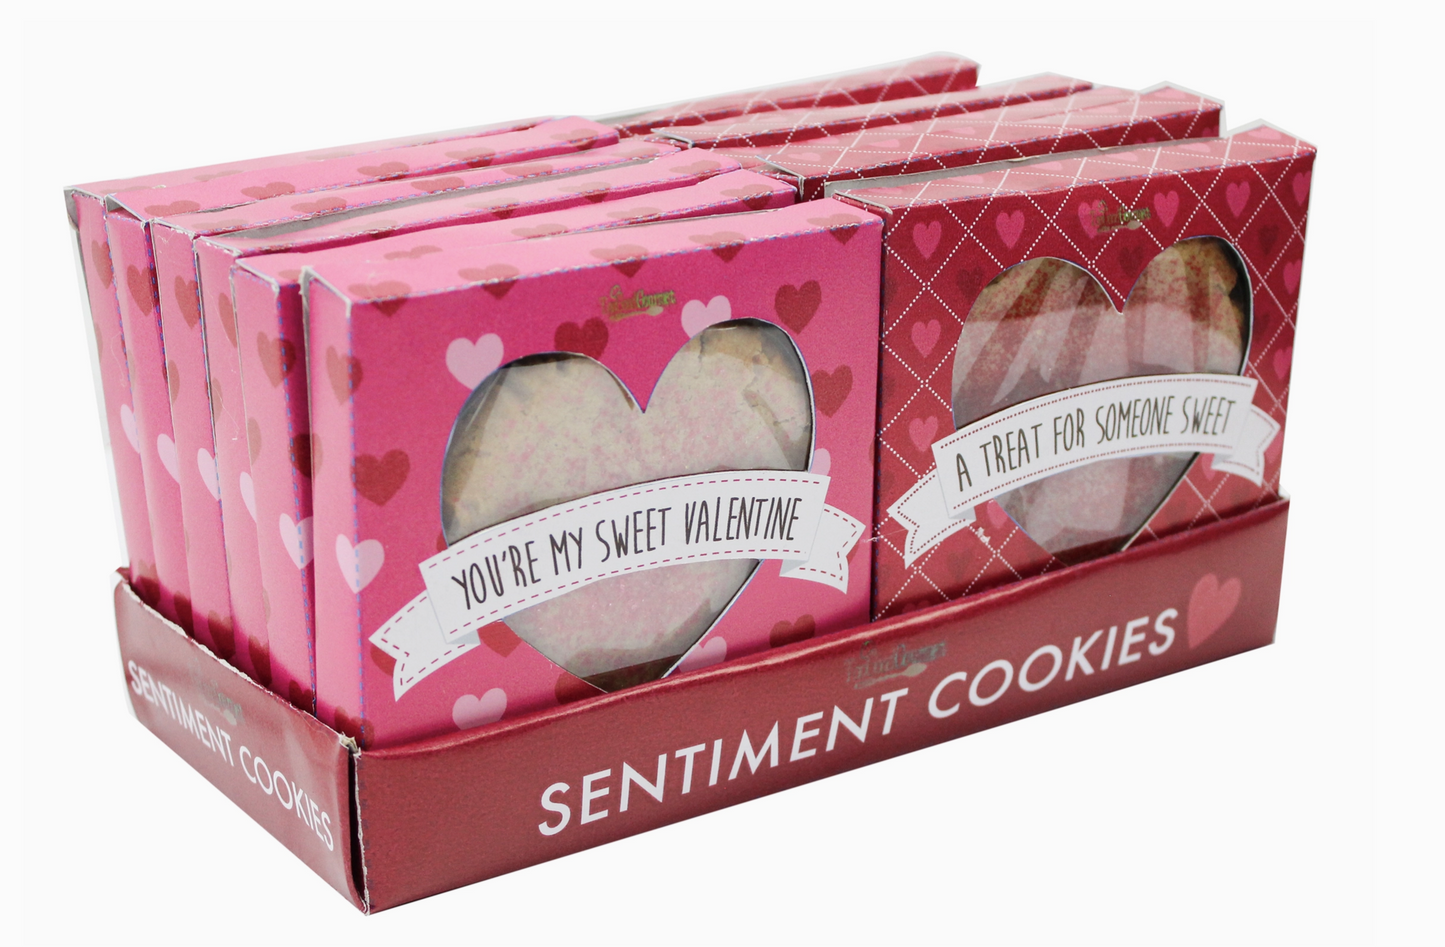 You're My Sweet Valentine - Sentiment Cookies